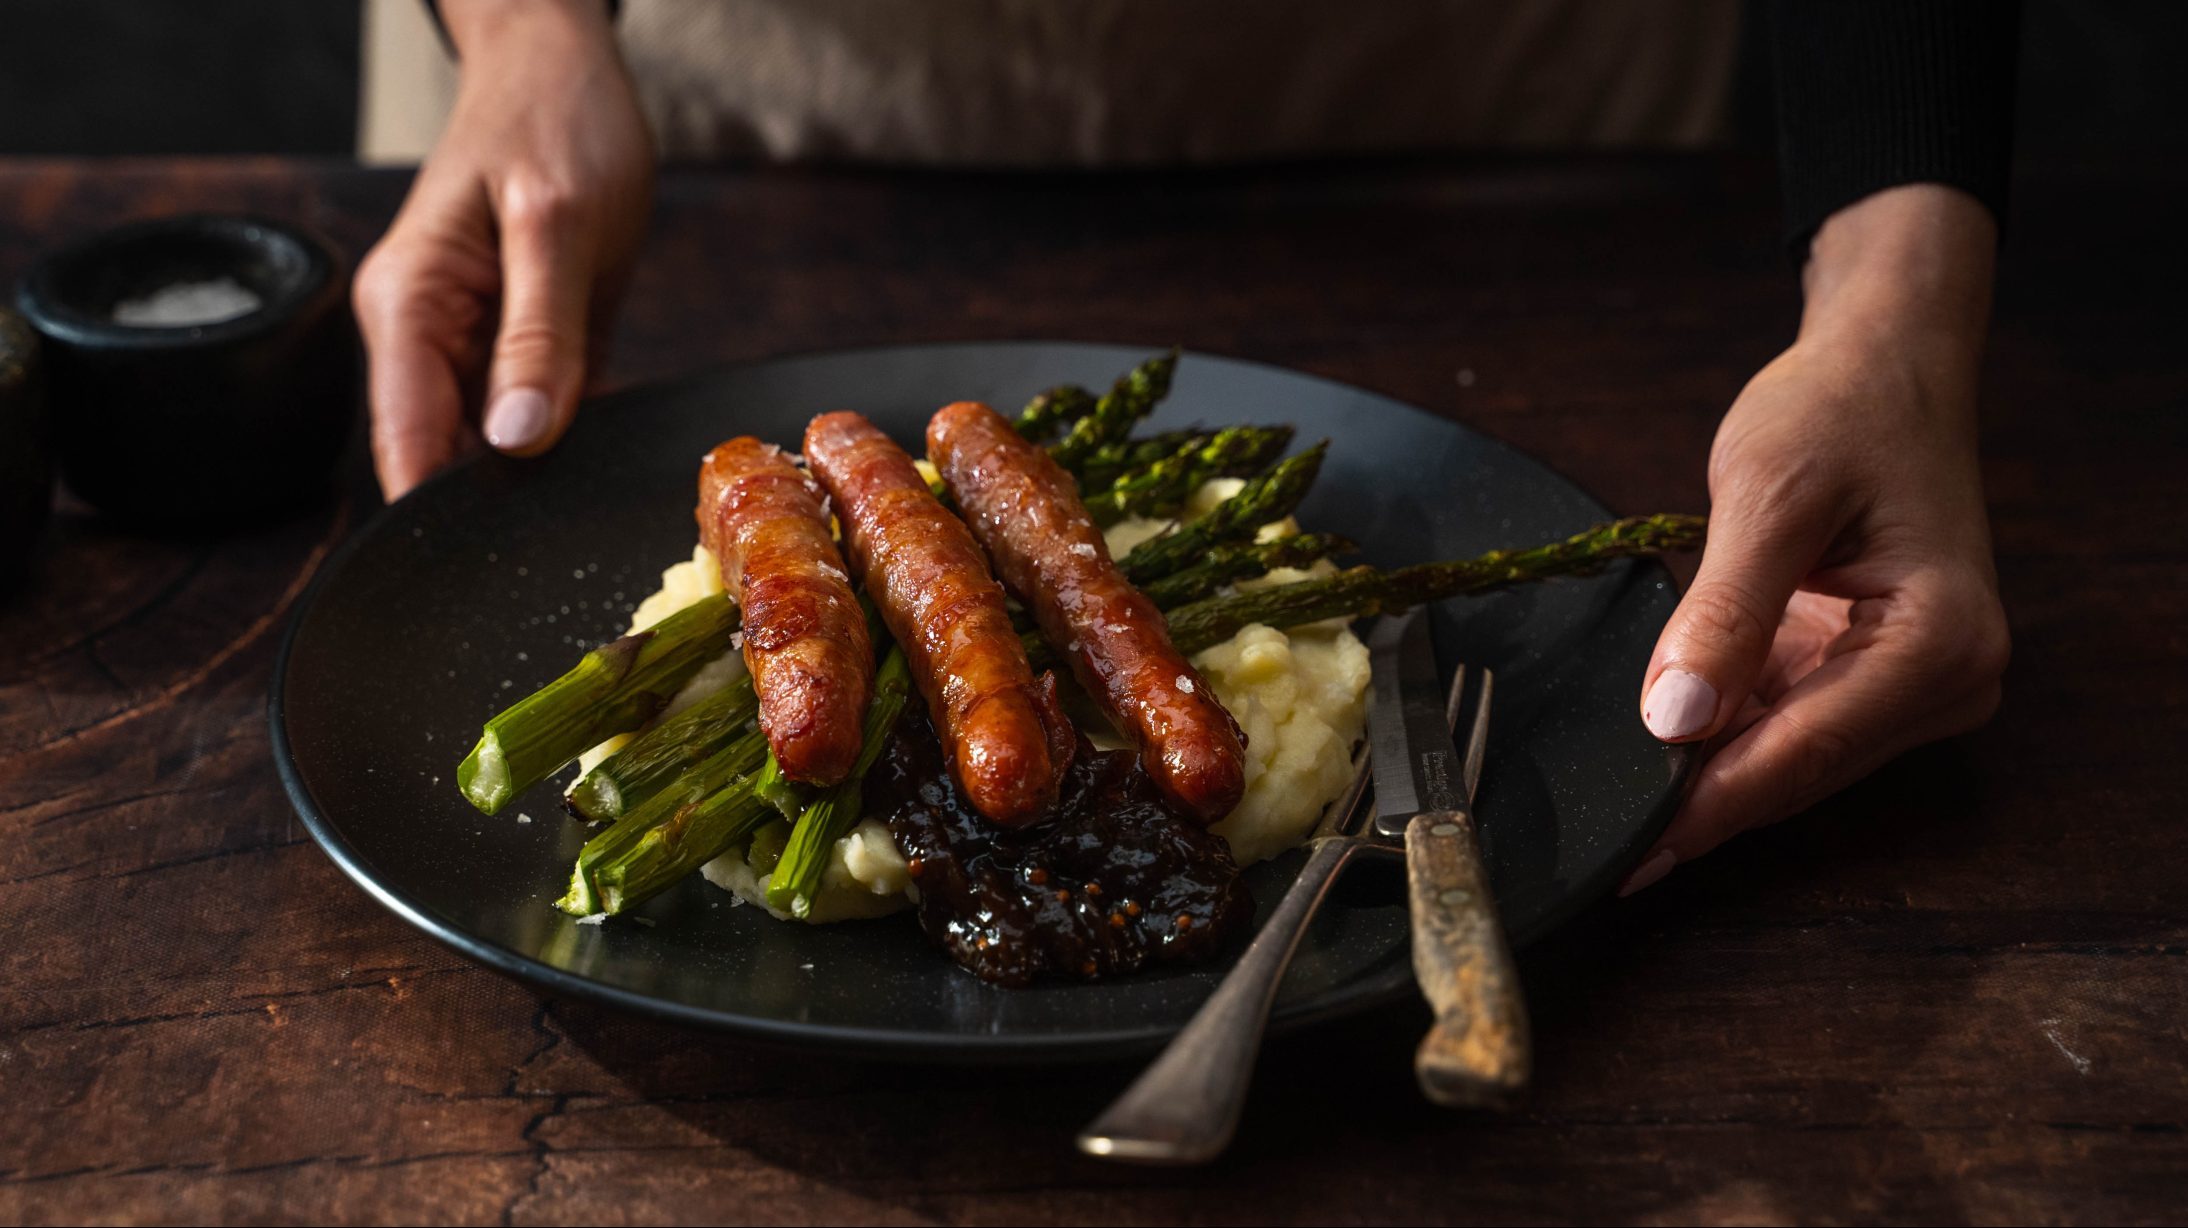 A pair of hands serving a black plate of sausages & mash and green asparagus with a fork and knife.